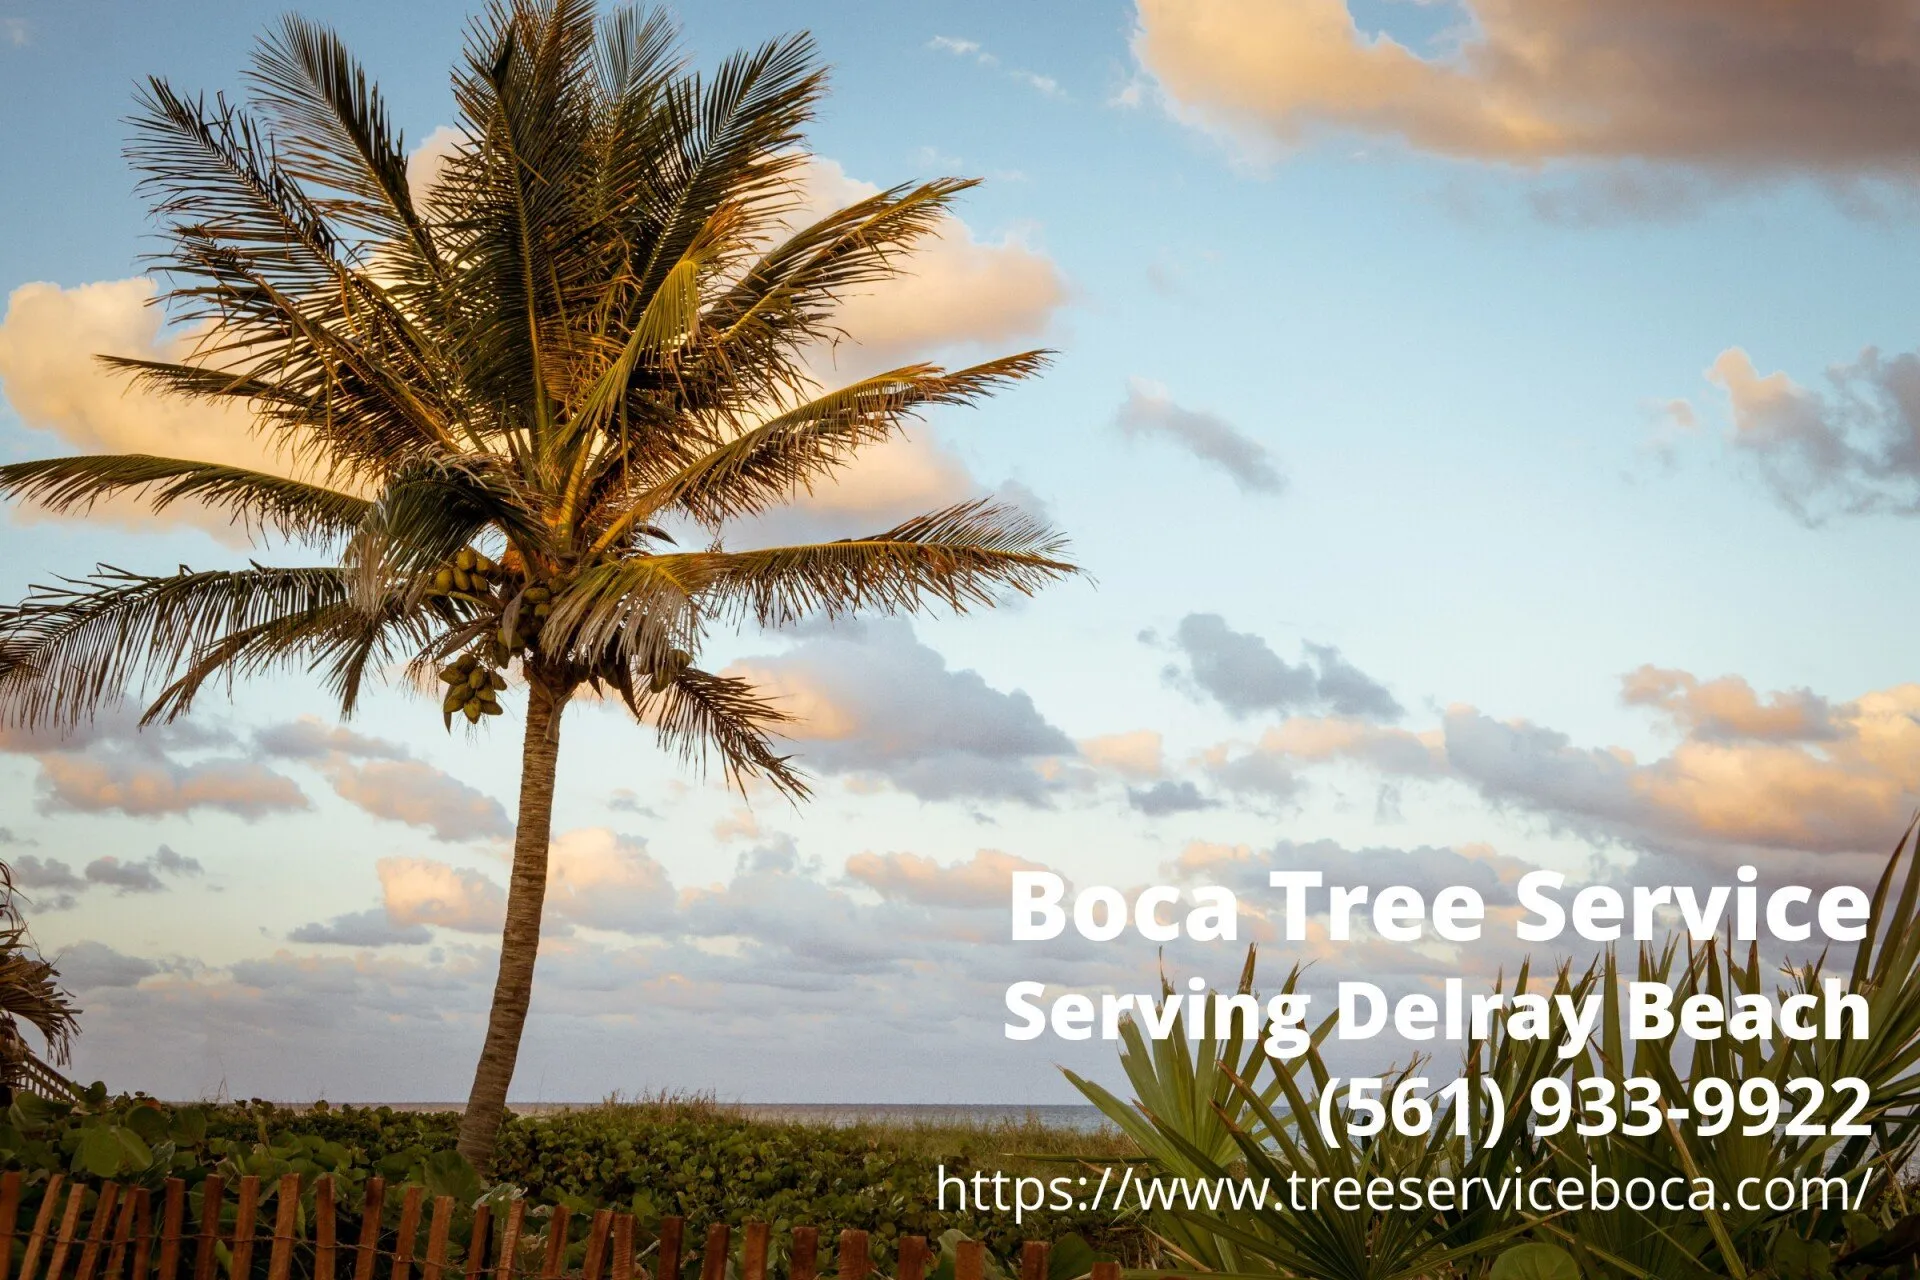 a sky bursting red and yellow taken Delray Beach with the contact info of Boca Tree Service, a tree company serving Delray Beach FL